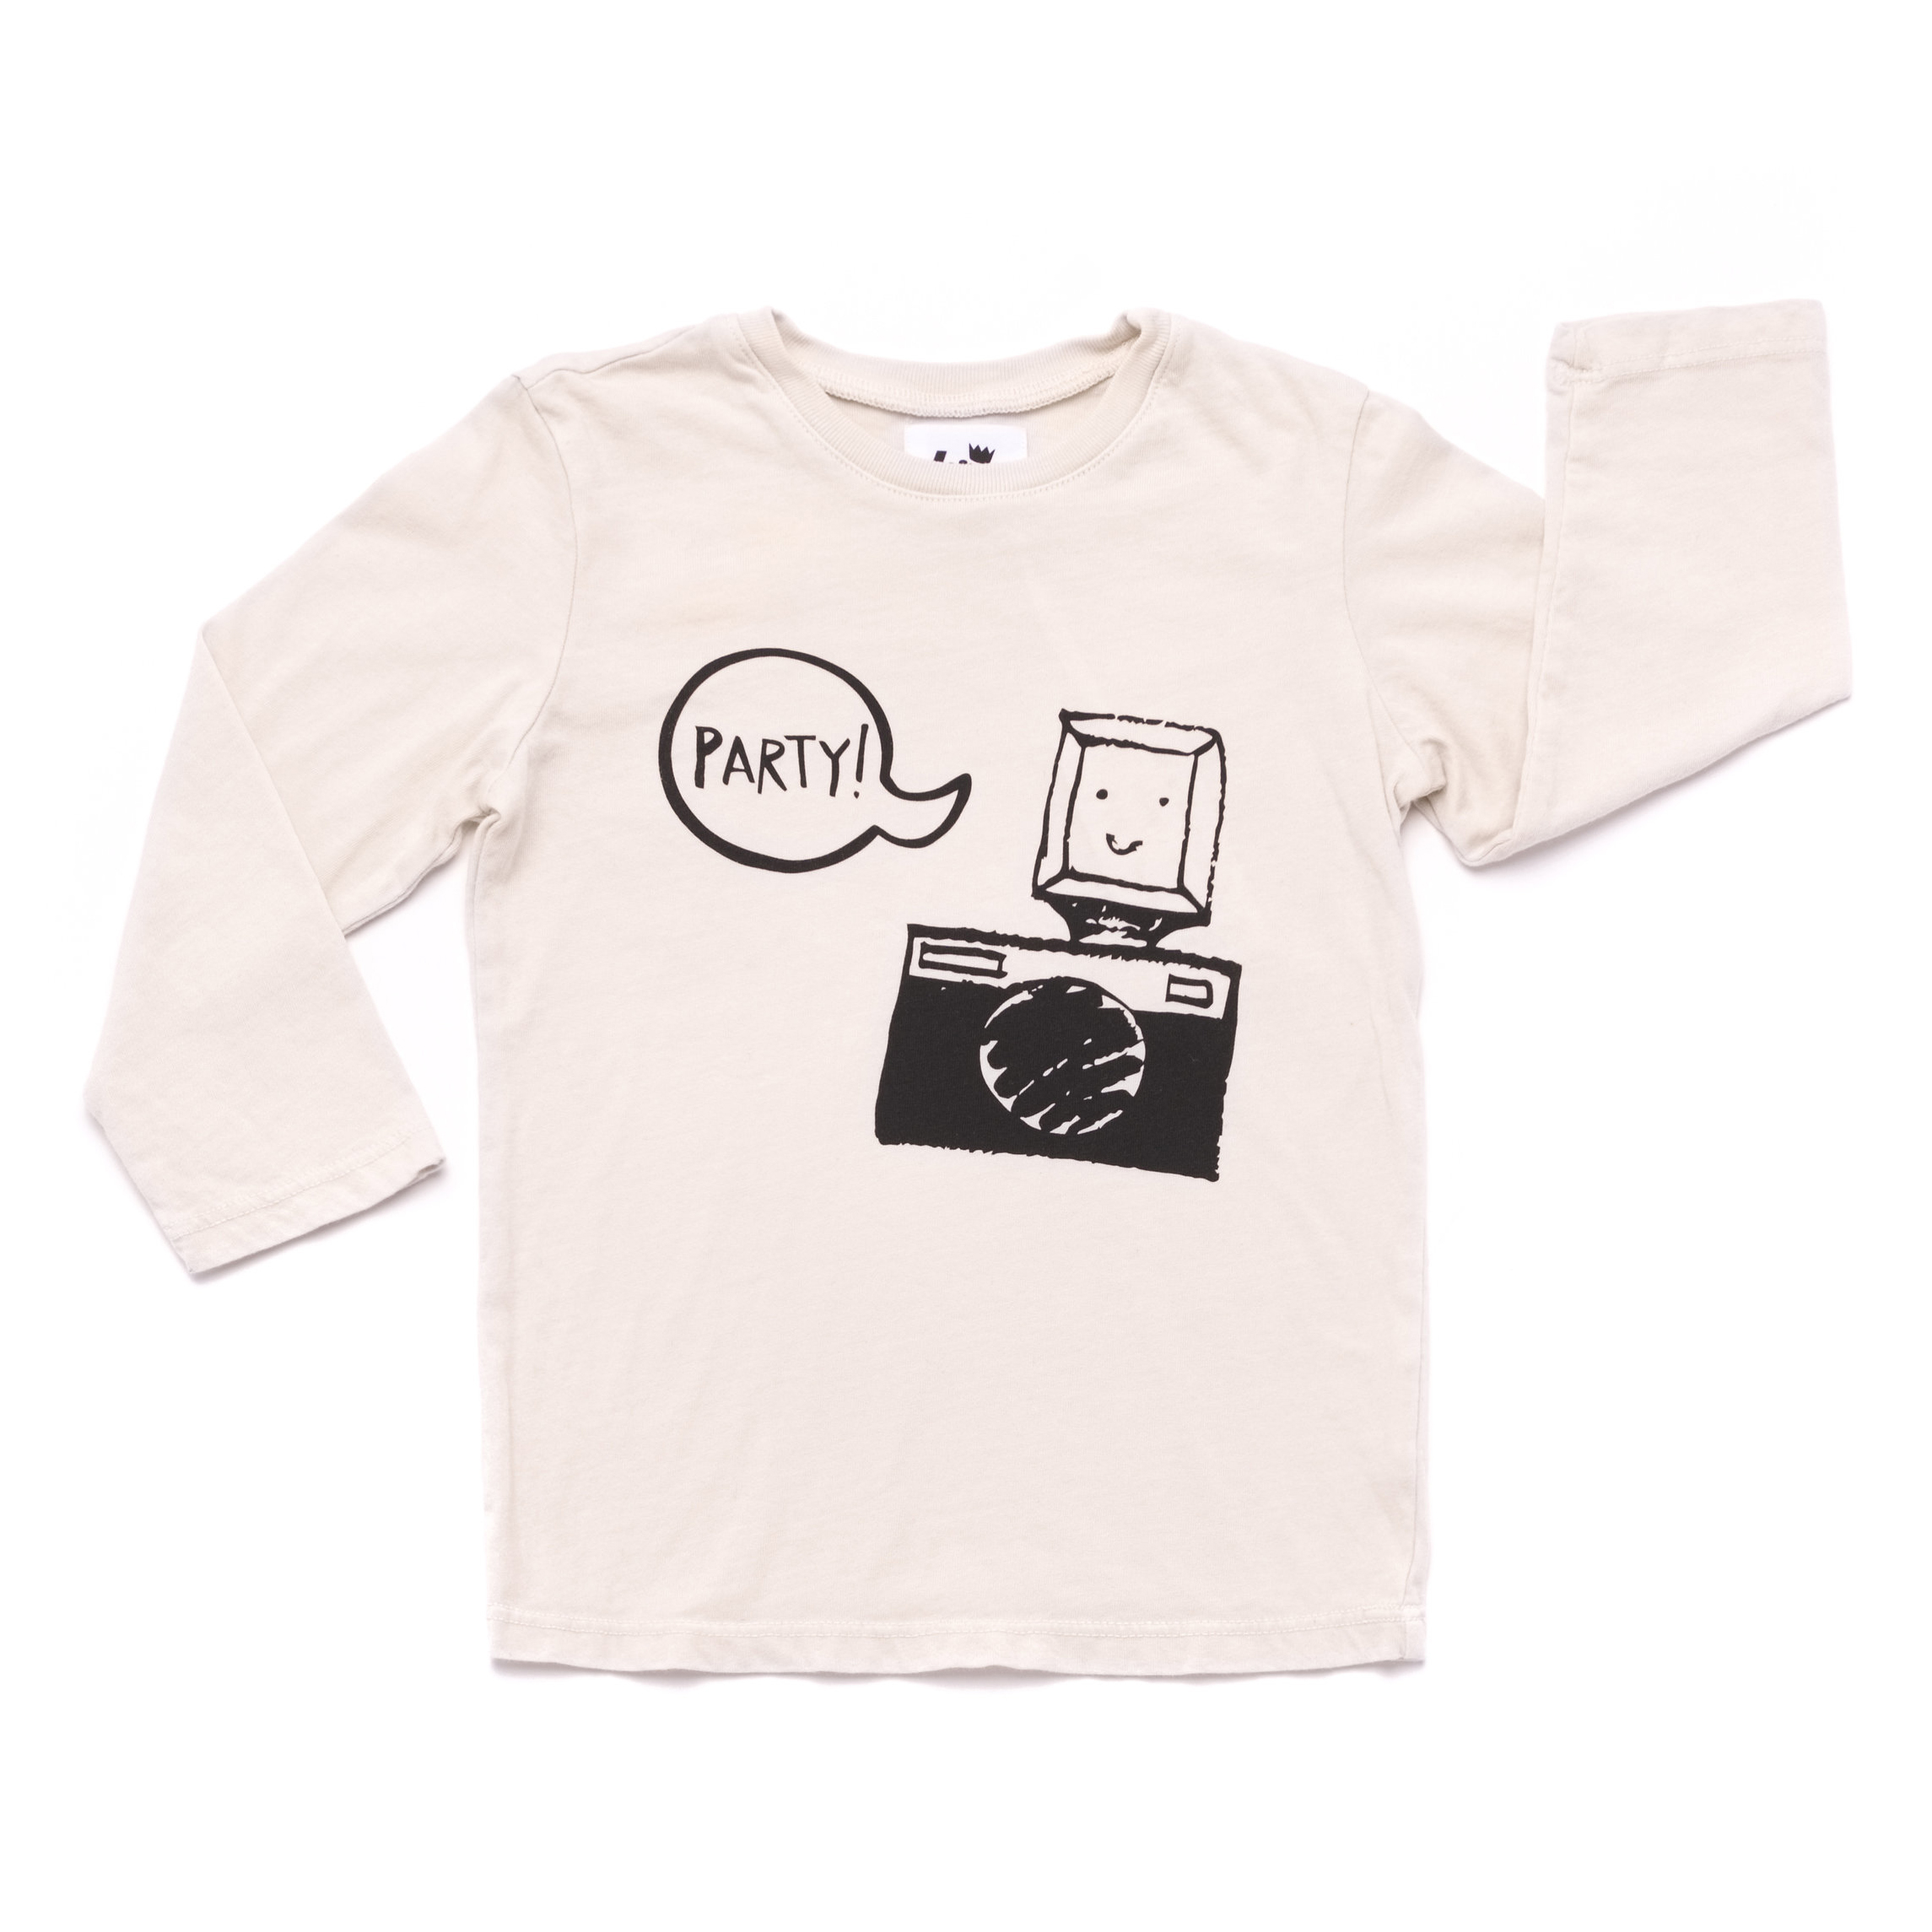 Party Camera Graphic T-shirt 